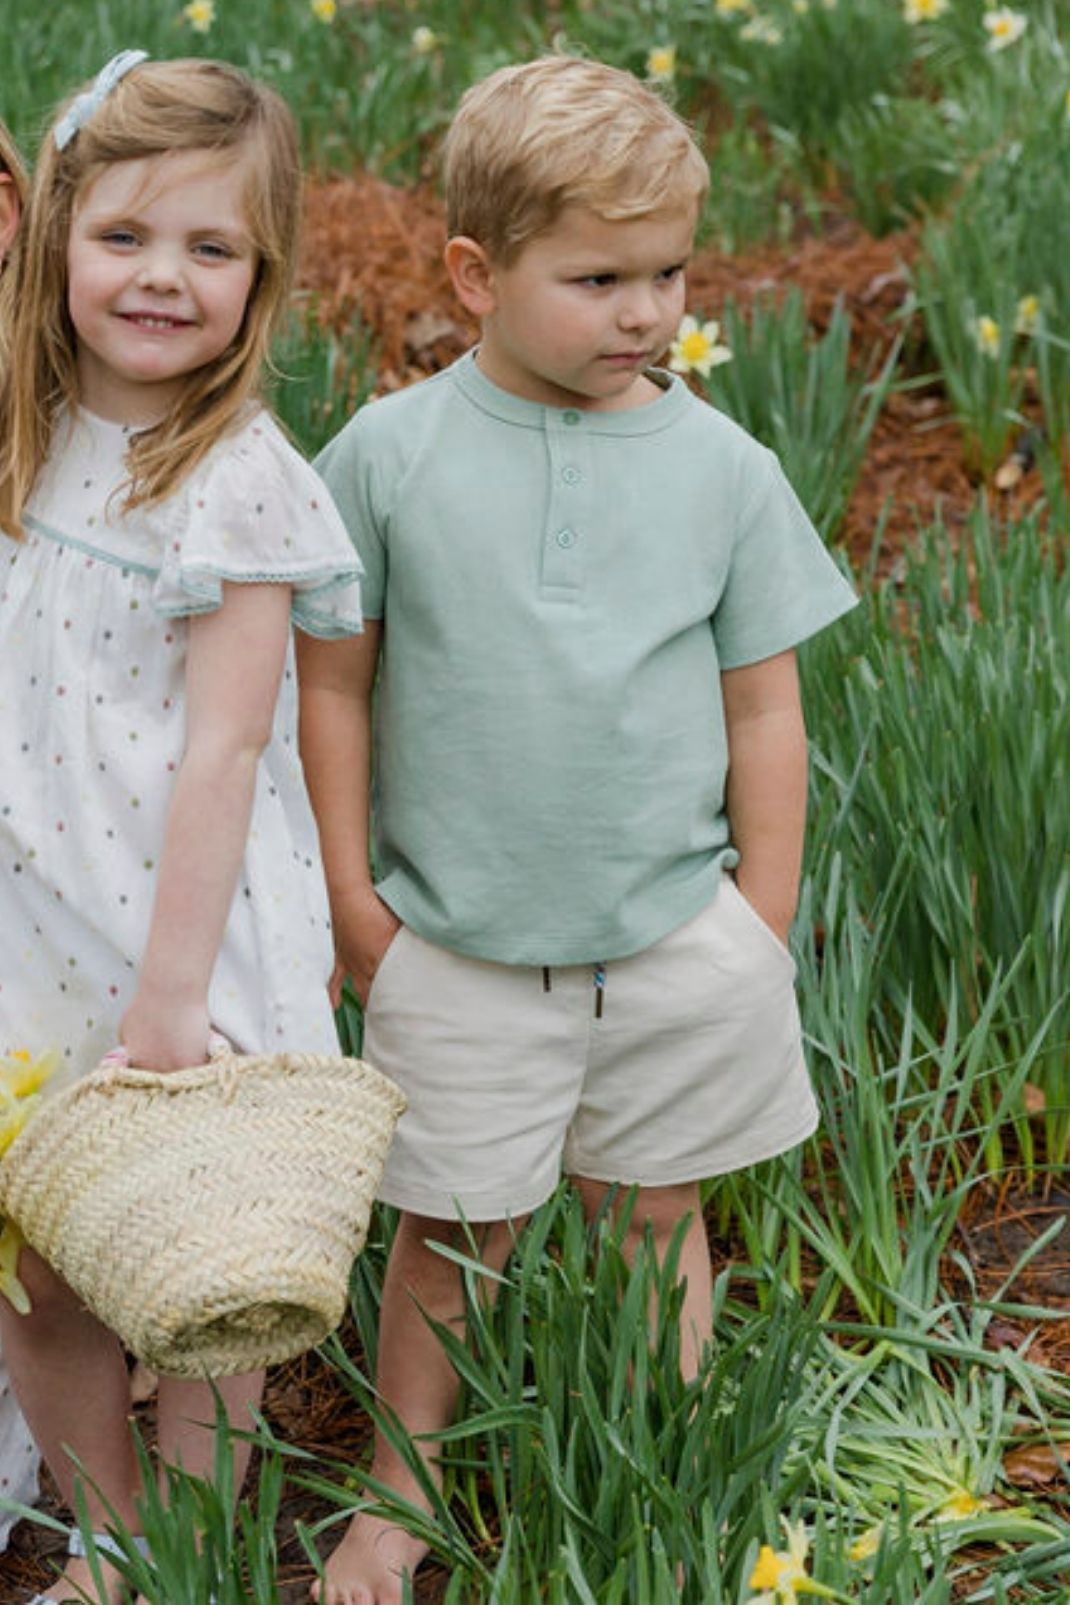 Lifestyle image of a little boy and girl standing outside in a field of flowers